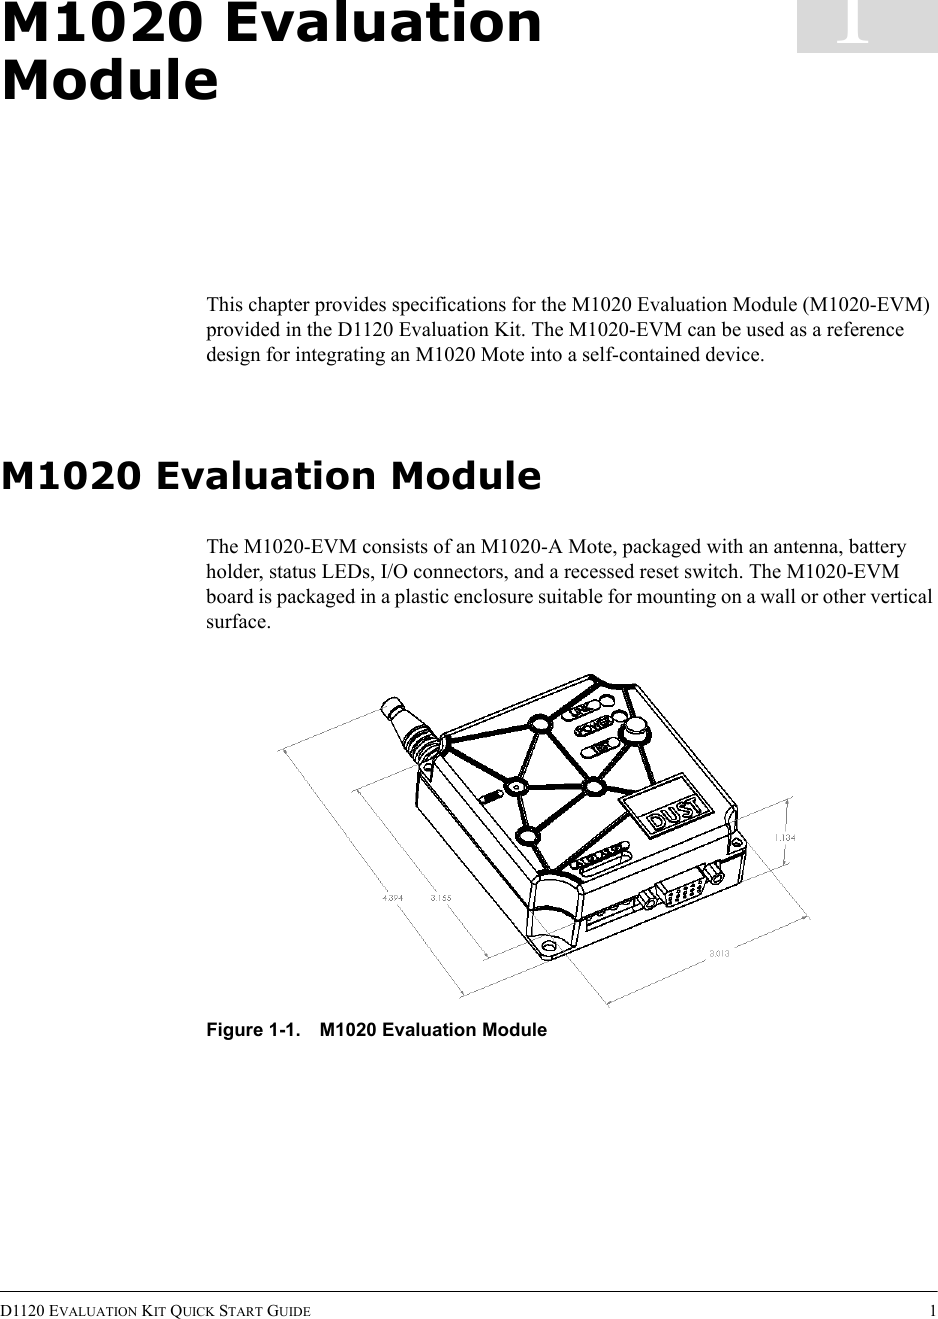 D1120 EVALUATION KIT QUICK START GUIDE 11M1020 Evaluation ModuleThis chapter provides specifications for the M1020 Evaluation Module (M1020-EVM) provided in the D1120 Evaluation Kit. The M1020-EVM can be used as a reference design for integrating an M1020 Mote into a self-contained device.M1020 Evaluation ModuleThe M1020-EVM consists of an M1020-A Mote, packaged with an antenna, battery holder, status LEDs, I/O connectors, and a recessed reset switch. The M1020-EVM board is packaged in a plastic enclosure suitable for mounting on a wall or other vertical surface.Figure 1-1. M1020 Evaluation Module